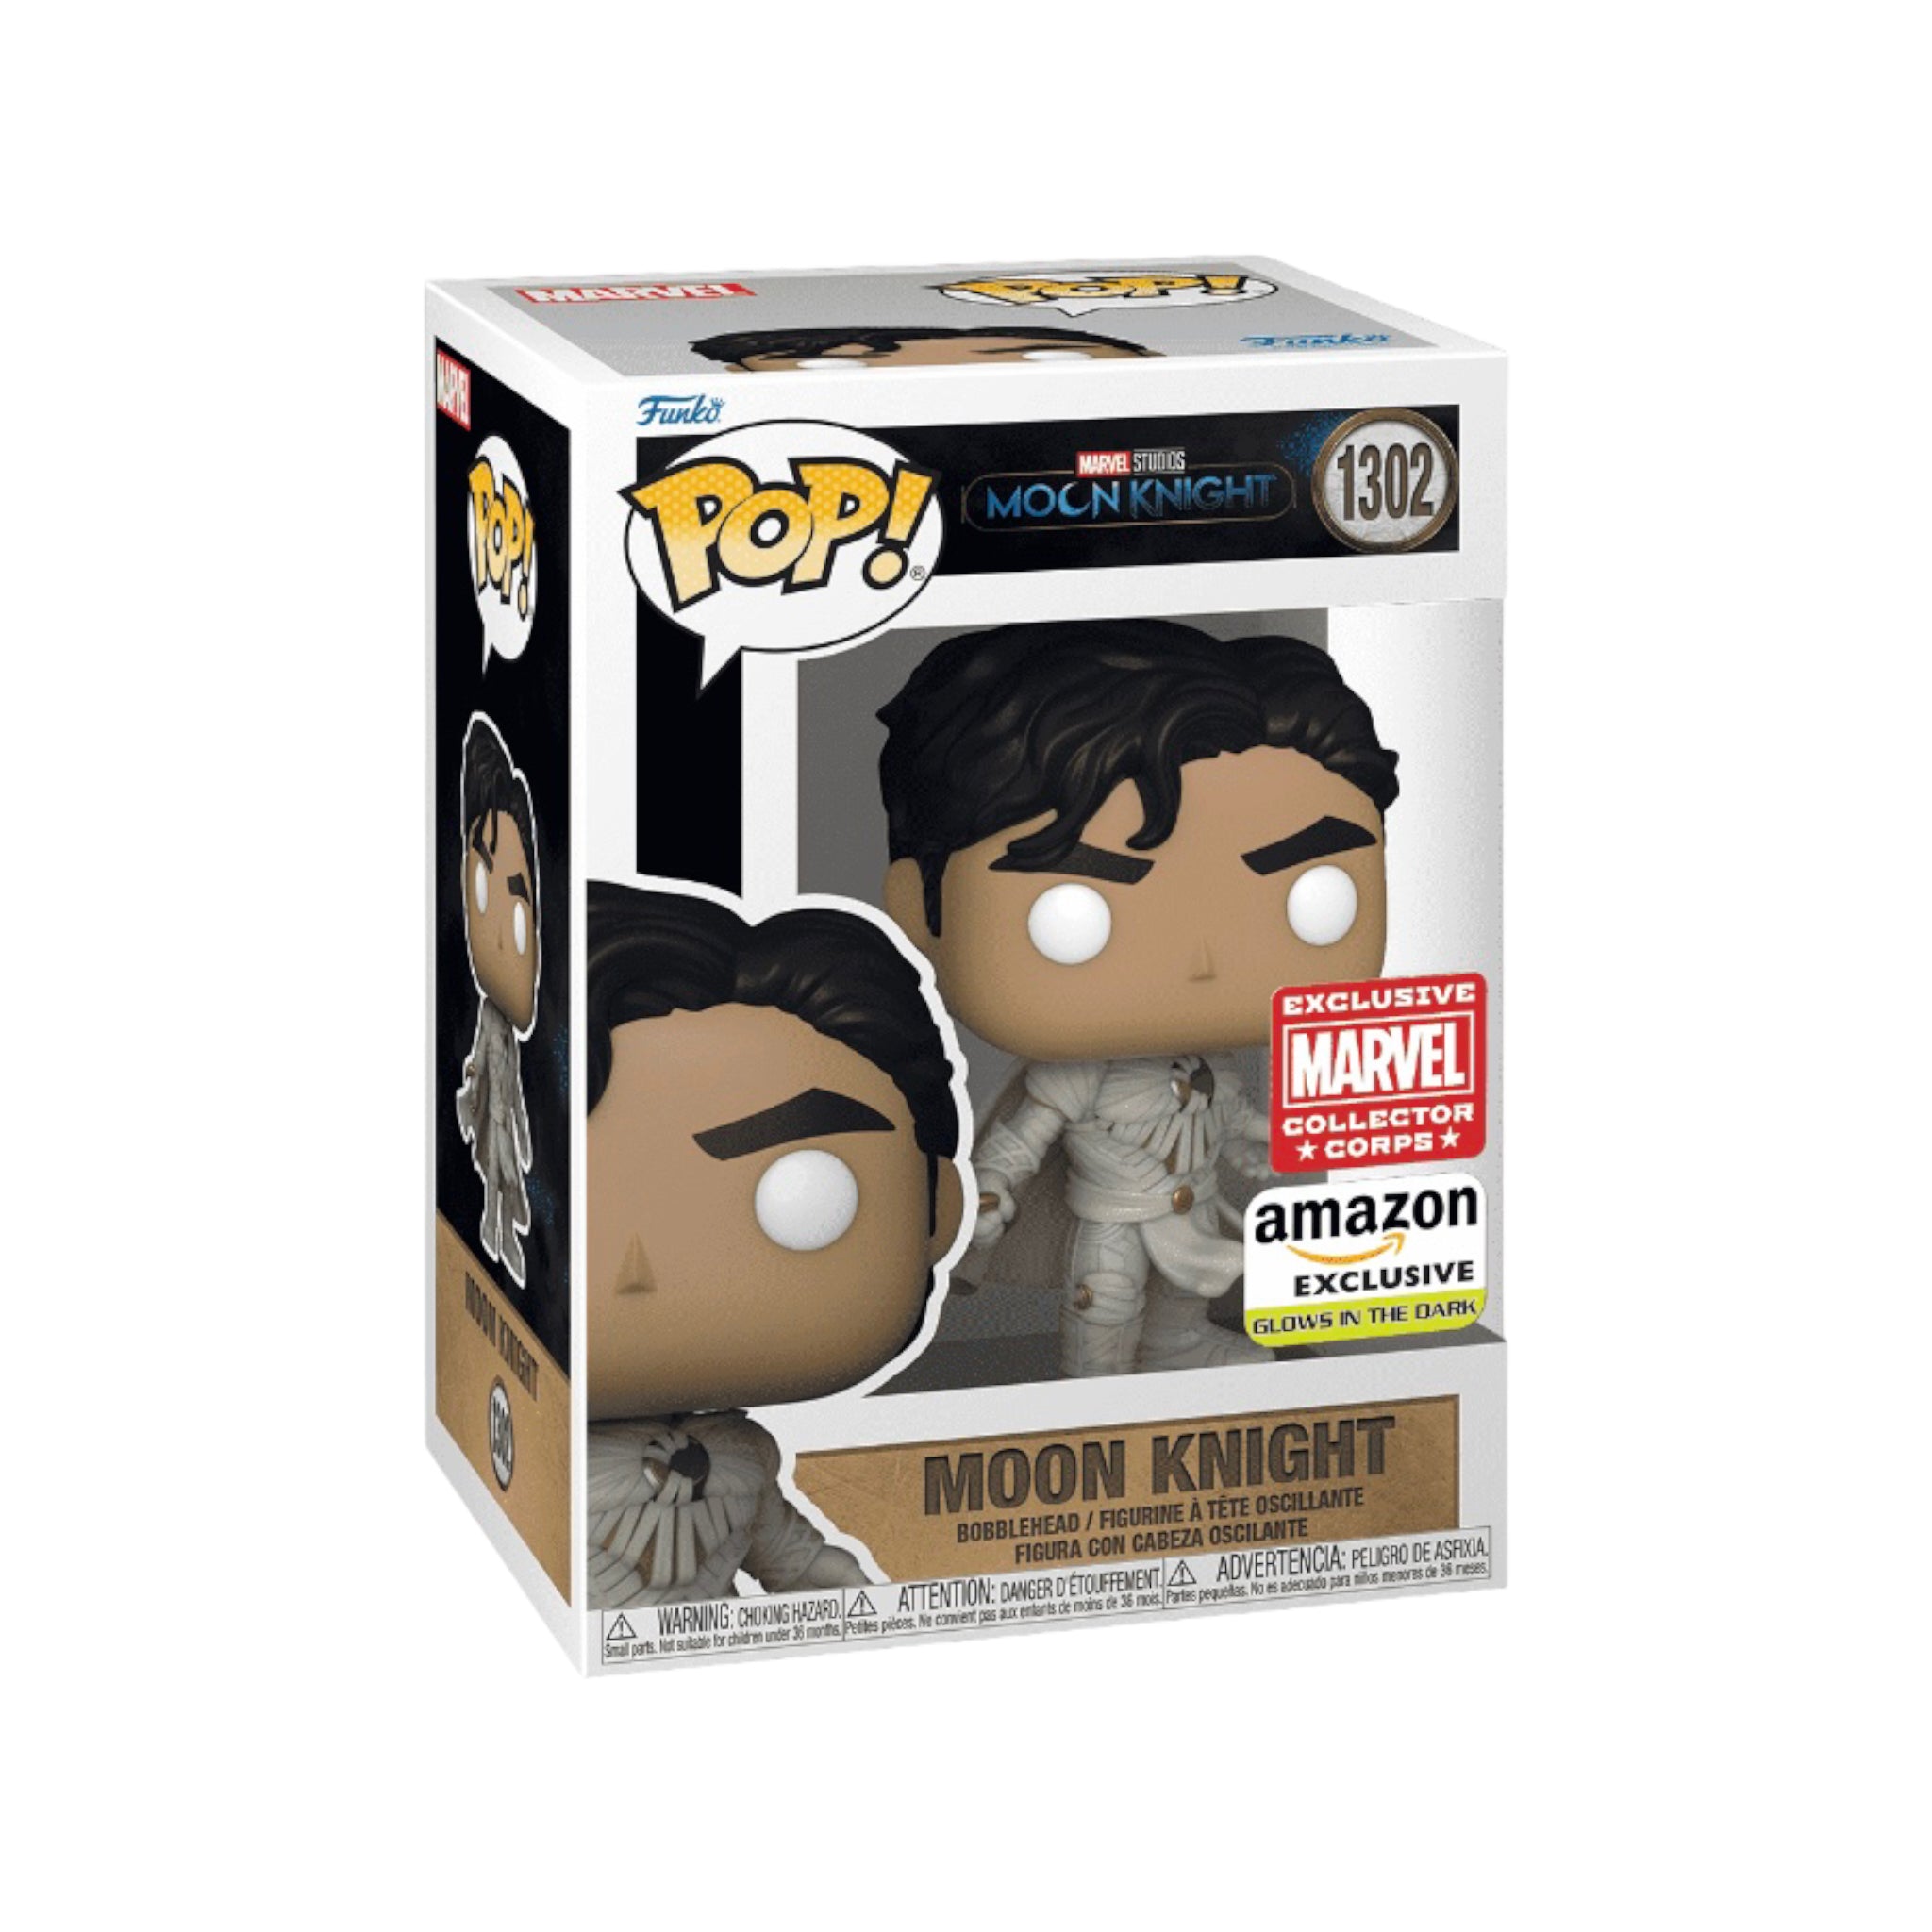 Moon Knight #1302 (Unmasked Glows in the Dark) Funko Pop! - Moon Knight - Amazon Marvel Collector Corps Exclusive